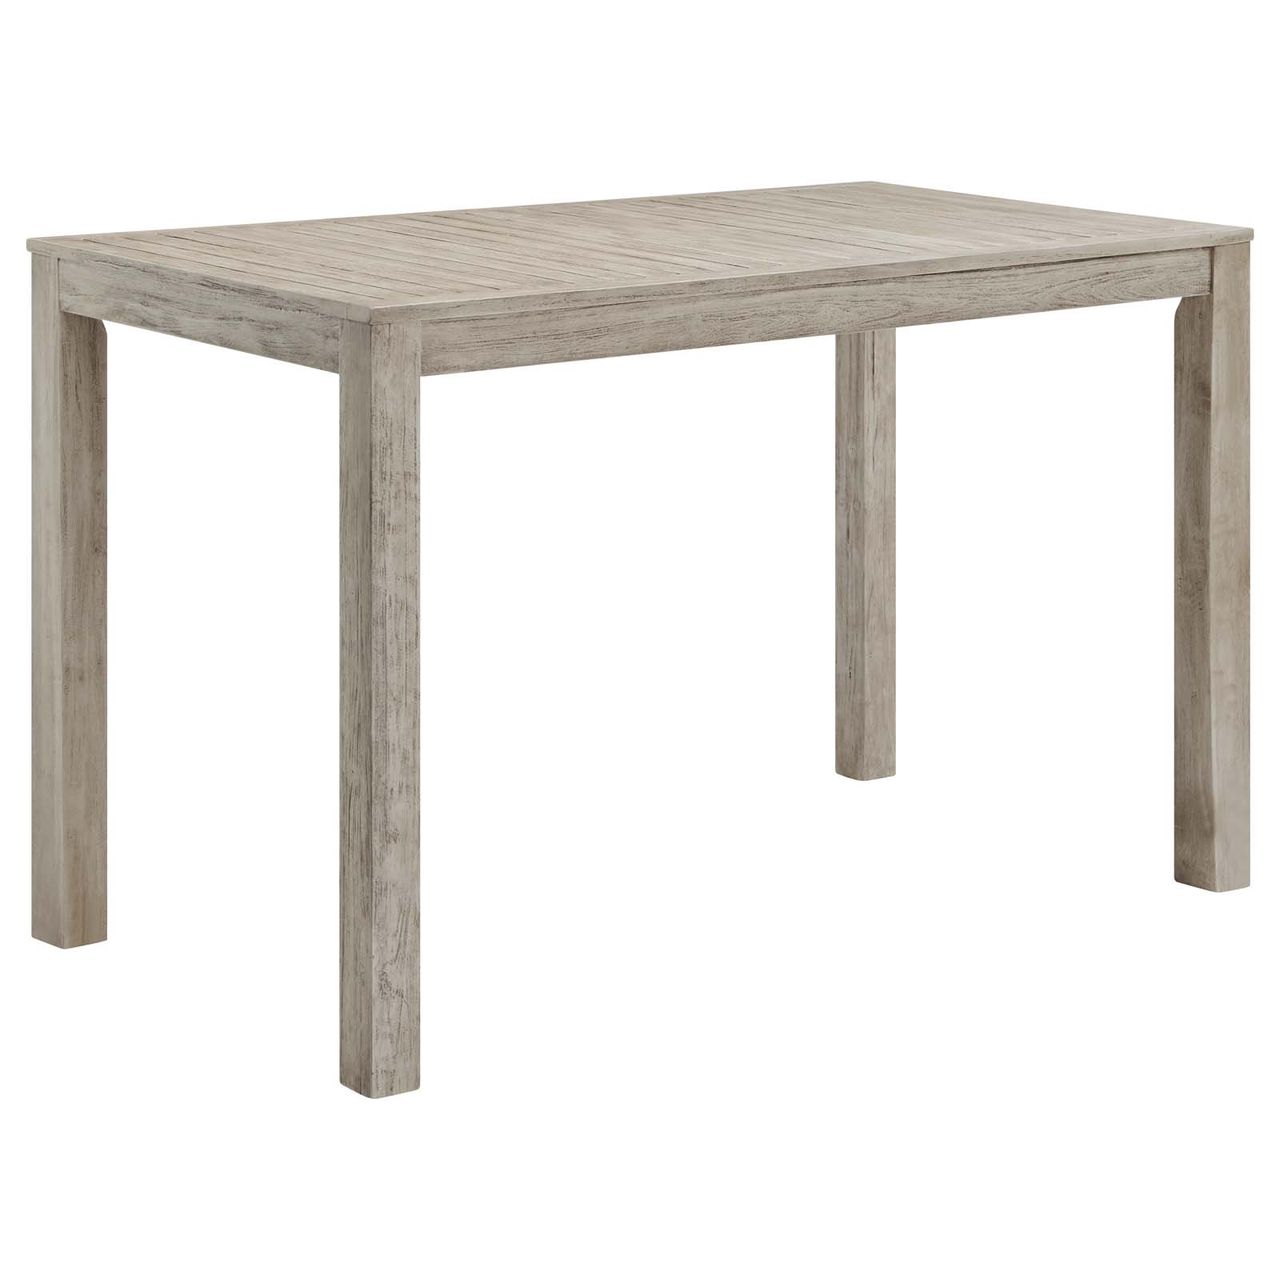 Modway Wiscasset Patio Acacia Wood Bar Table In Light Gray Finish EEI-3686-LGR - image 1 of 2